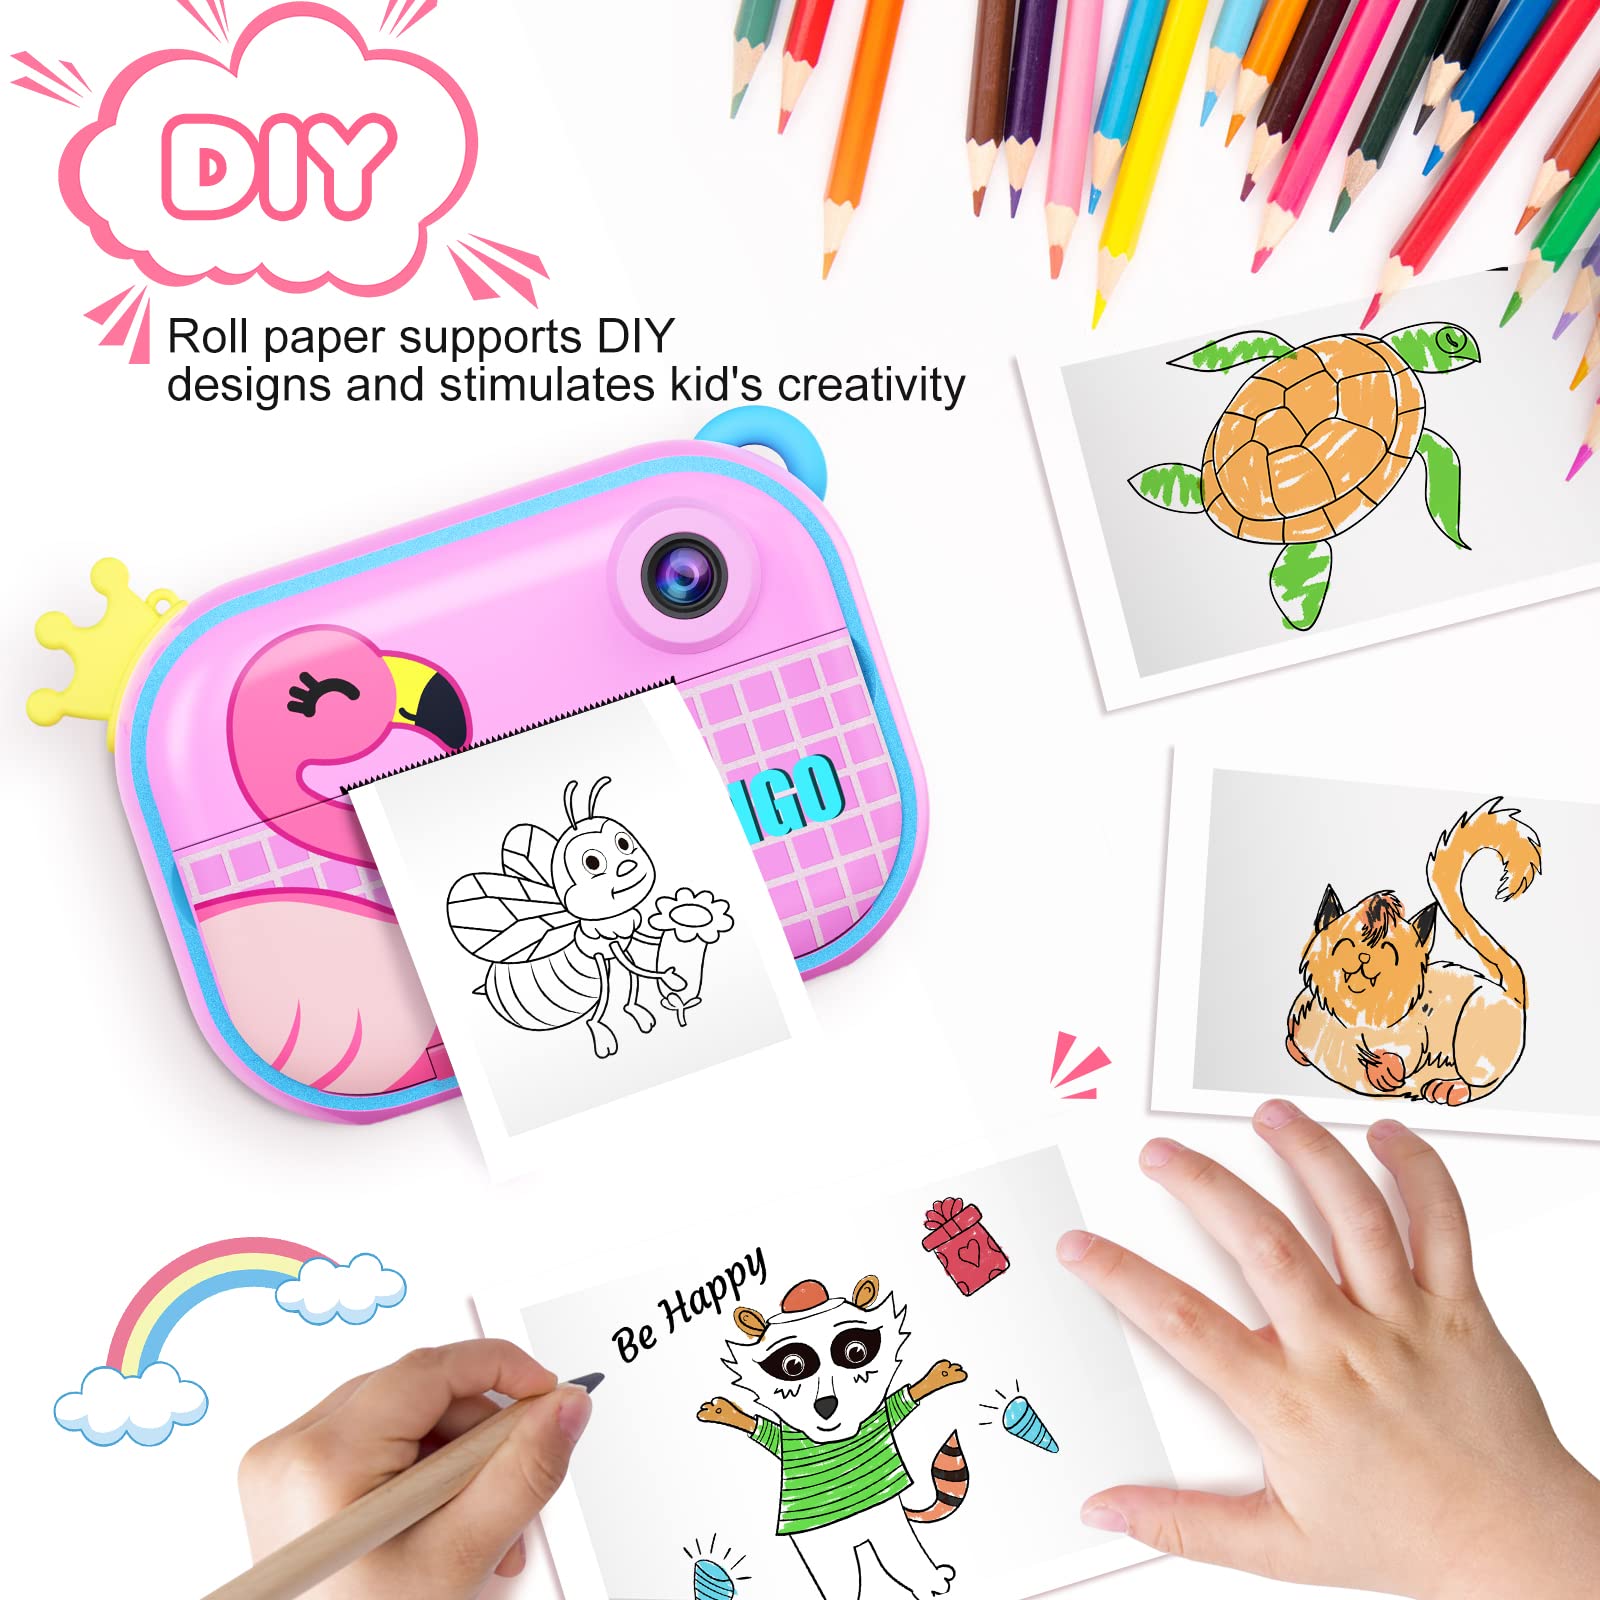 Instant Print Camera for Kids,Zero Ink Kids Camera with Print Paper,Selfie Video Digital Camera with HD 1080P 2.4 Inch IPS Screen,3-14 Years Old Children Toy Learning Camera for Birthday,Chistmas